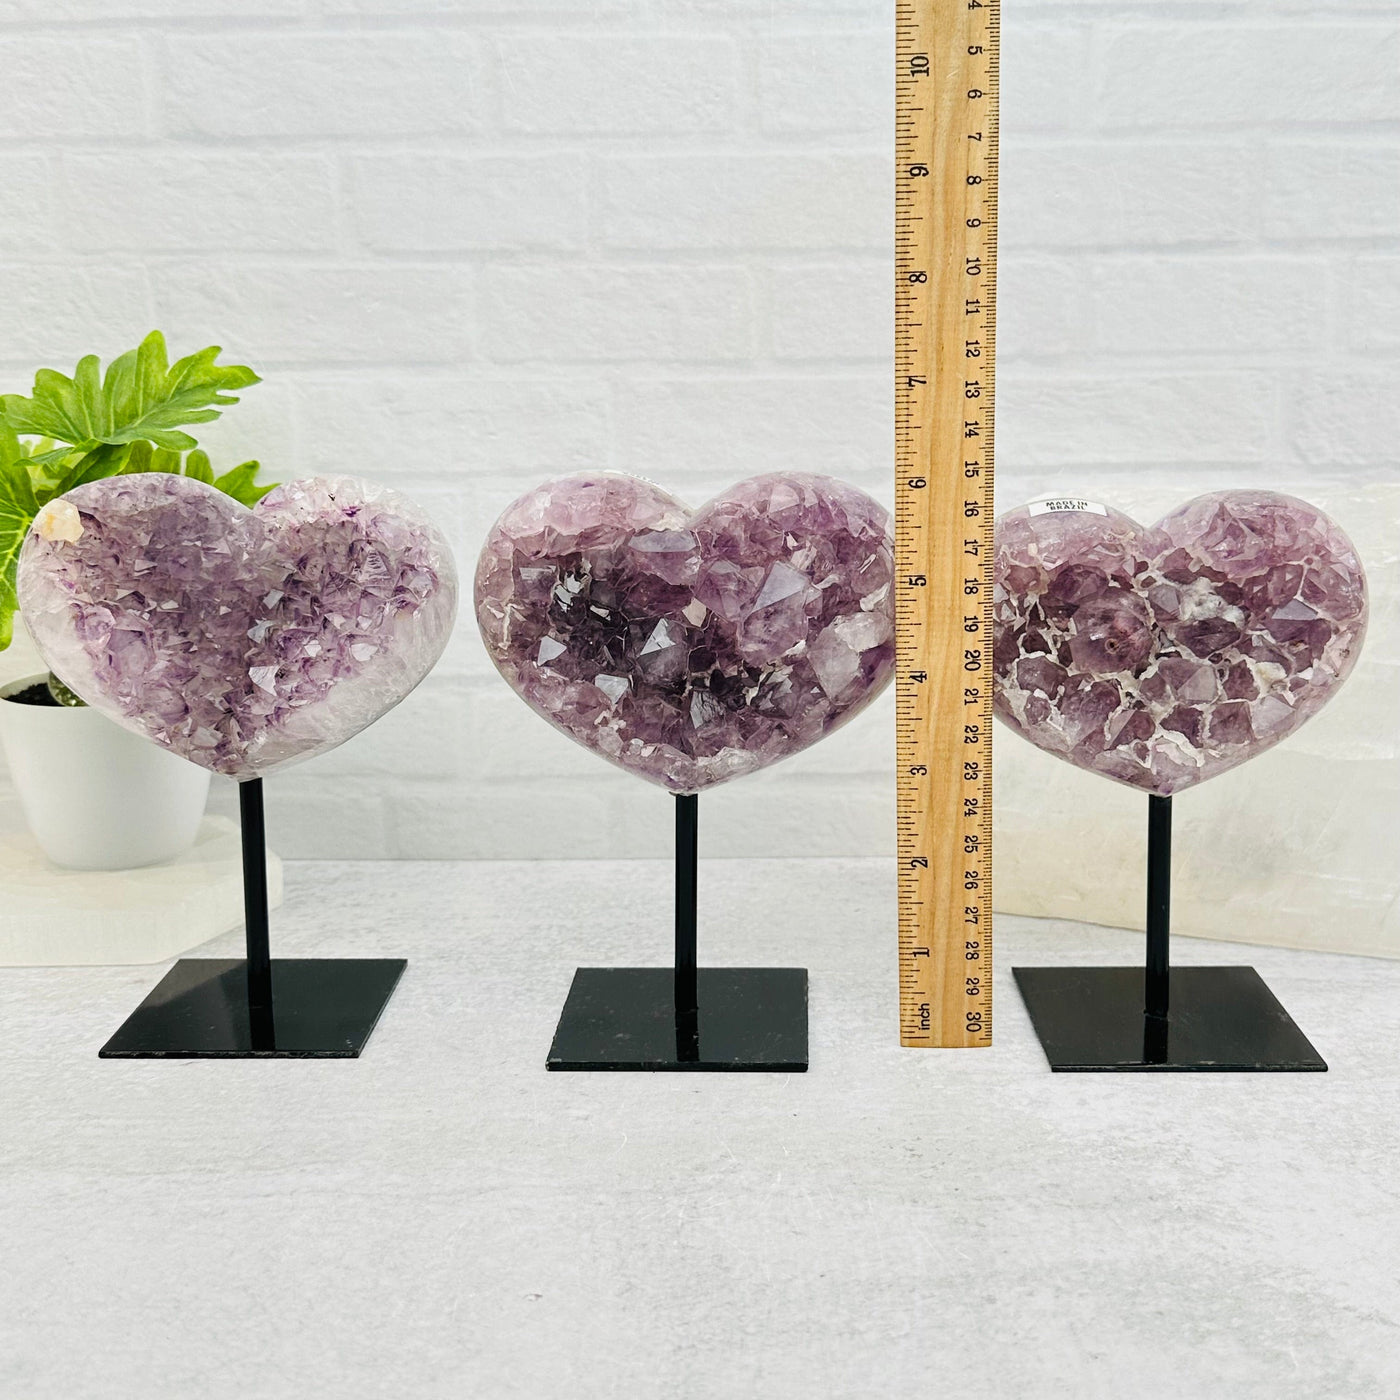 amethyst hearts next to a ruler for size reference 